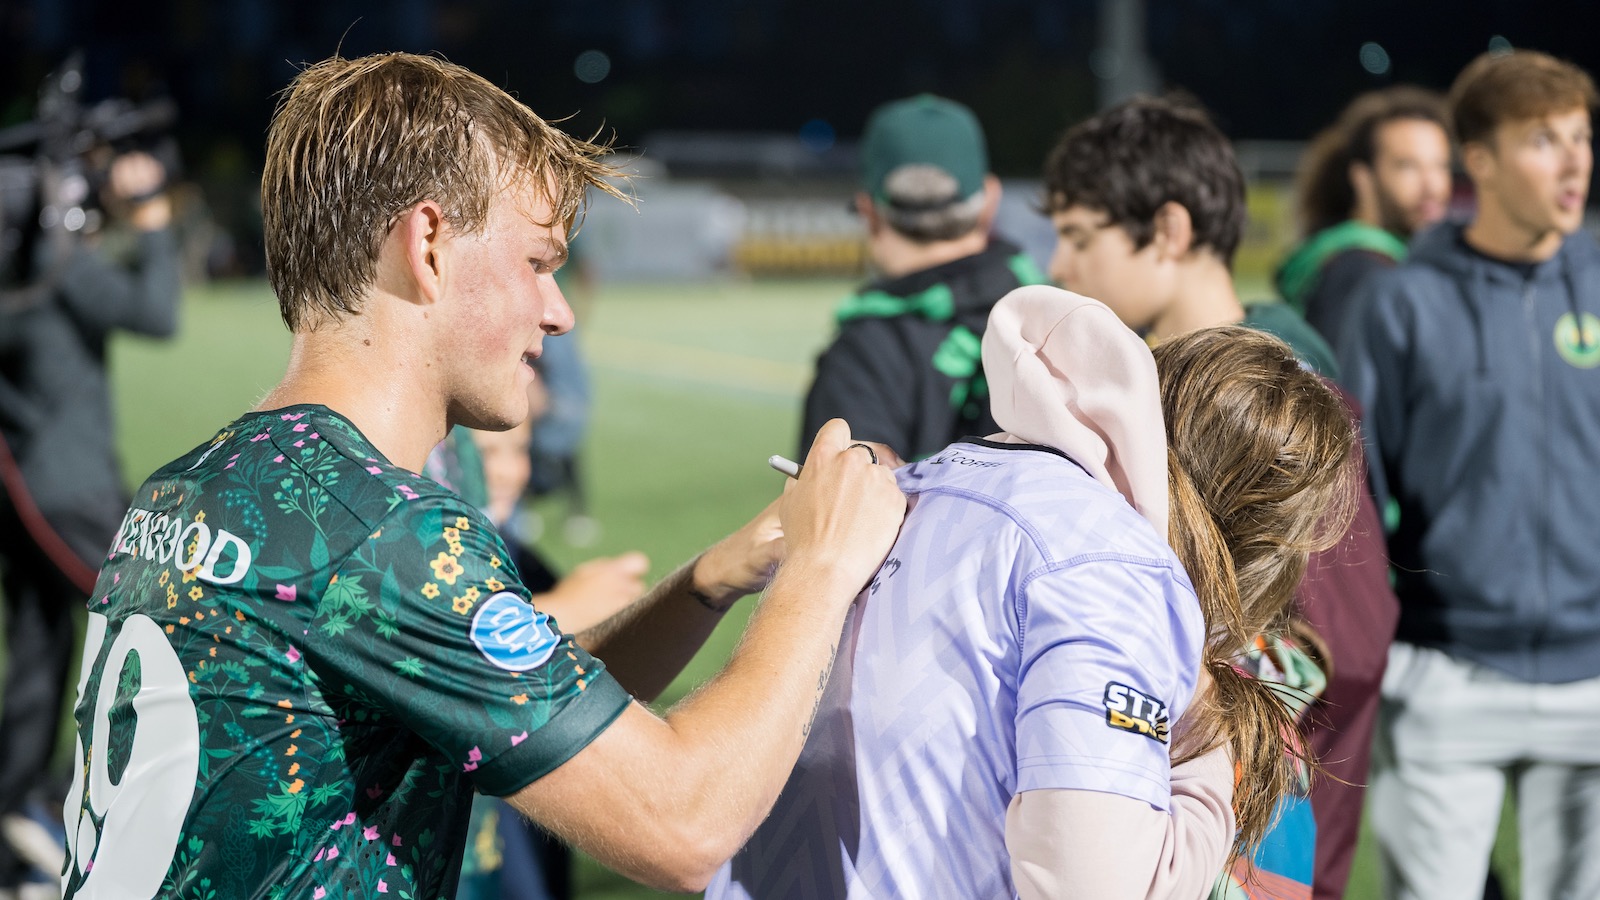 Soccer player Alexander Levengood, wearing a green Vermont Green FC jersey, signs an autograph on the back of a female fan wearing a lavender jersey over a pink hoodie.